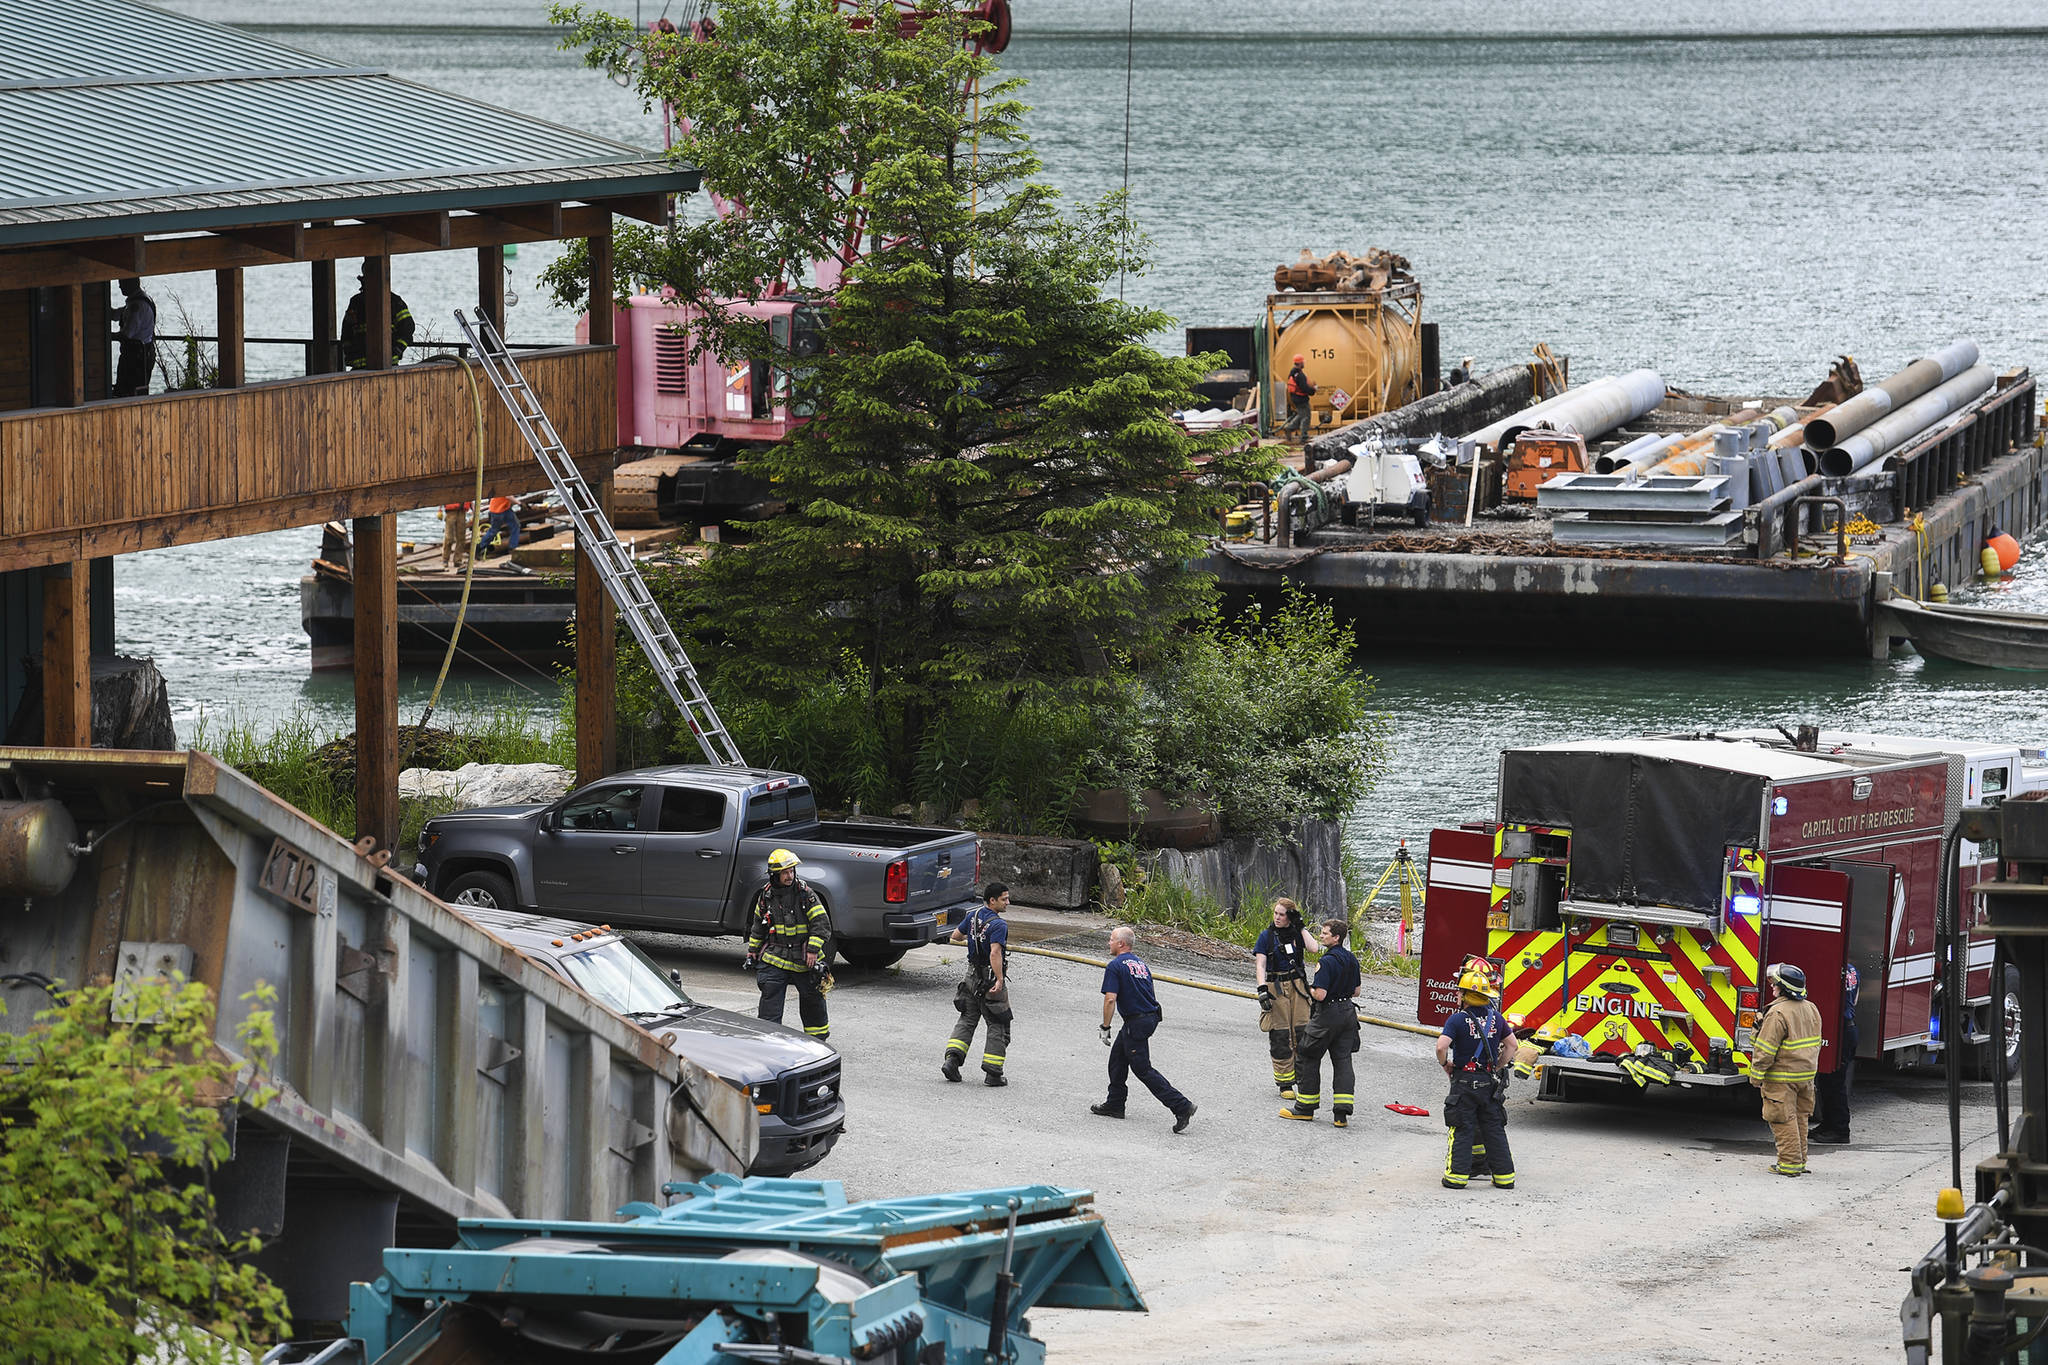 Capital City Fire/Rescue personnel attend to a fire found at an apartment on Channel Drive on Thursday, June 13, 2019. (Michael Penn | Juneau Empire)